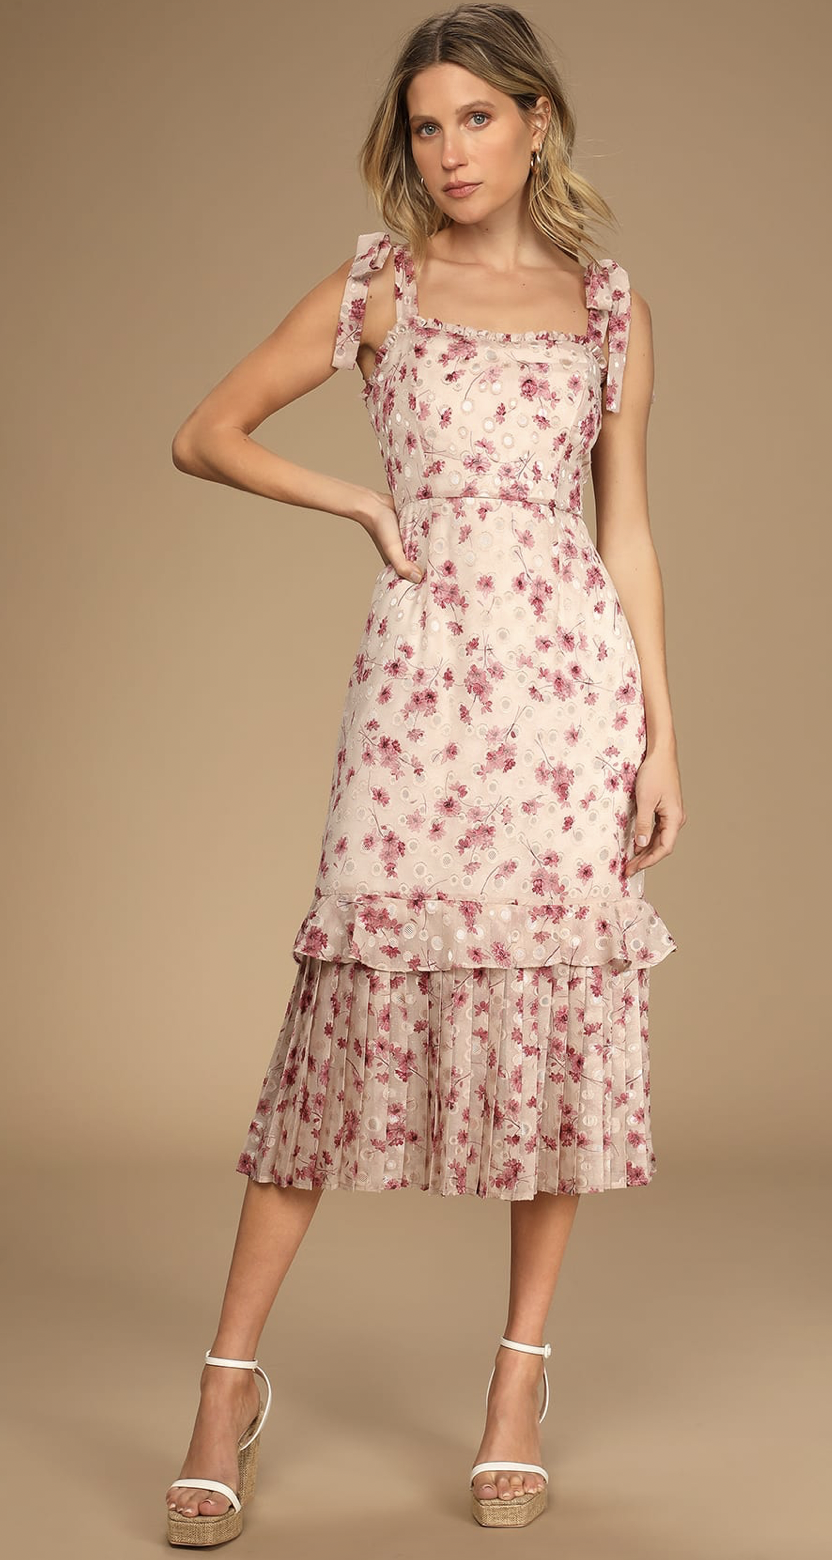 Terrace Views Taupe Floral Print Tiered Midi Dress